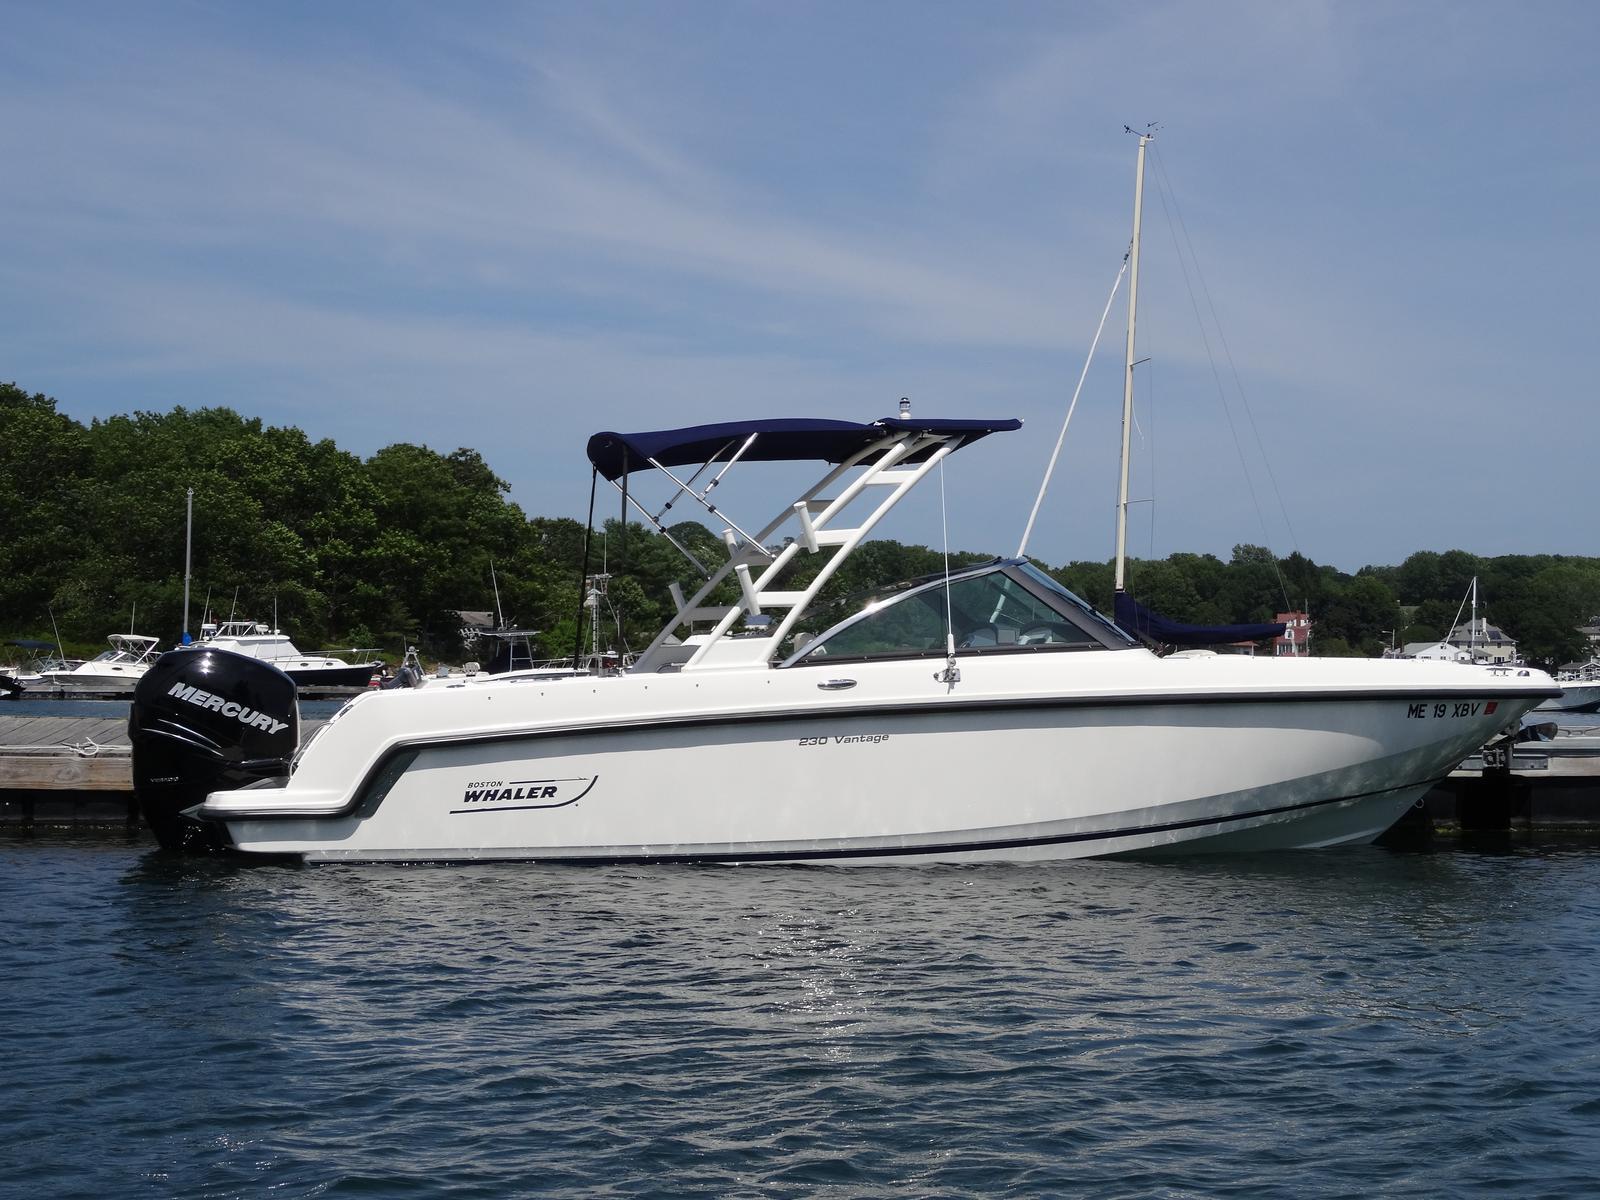 Used Boston Whaler boats for sale in Maine United States - boats.com